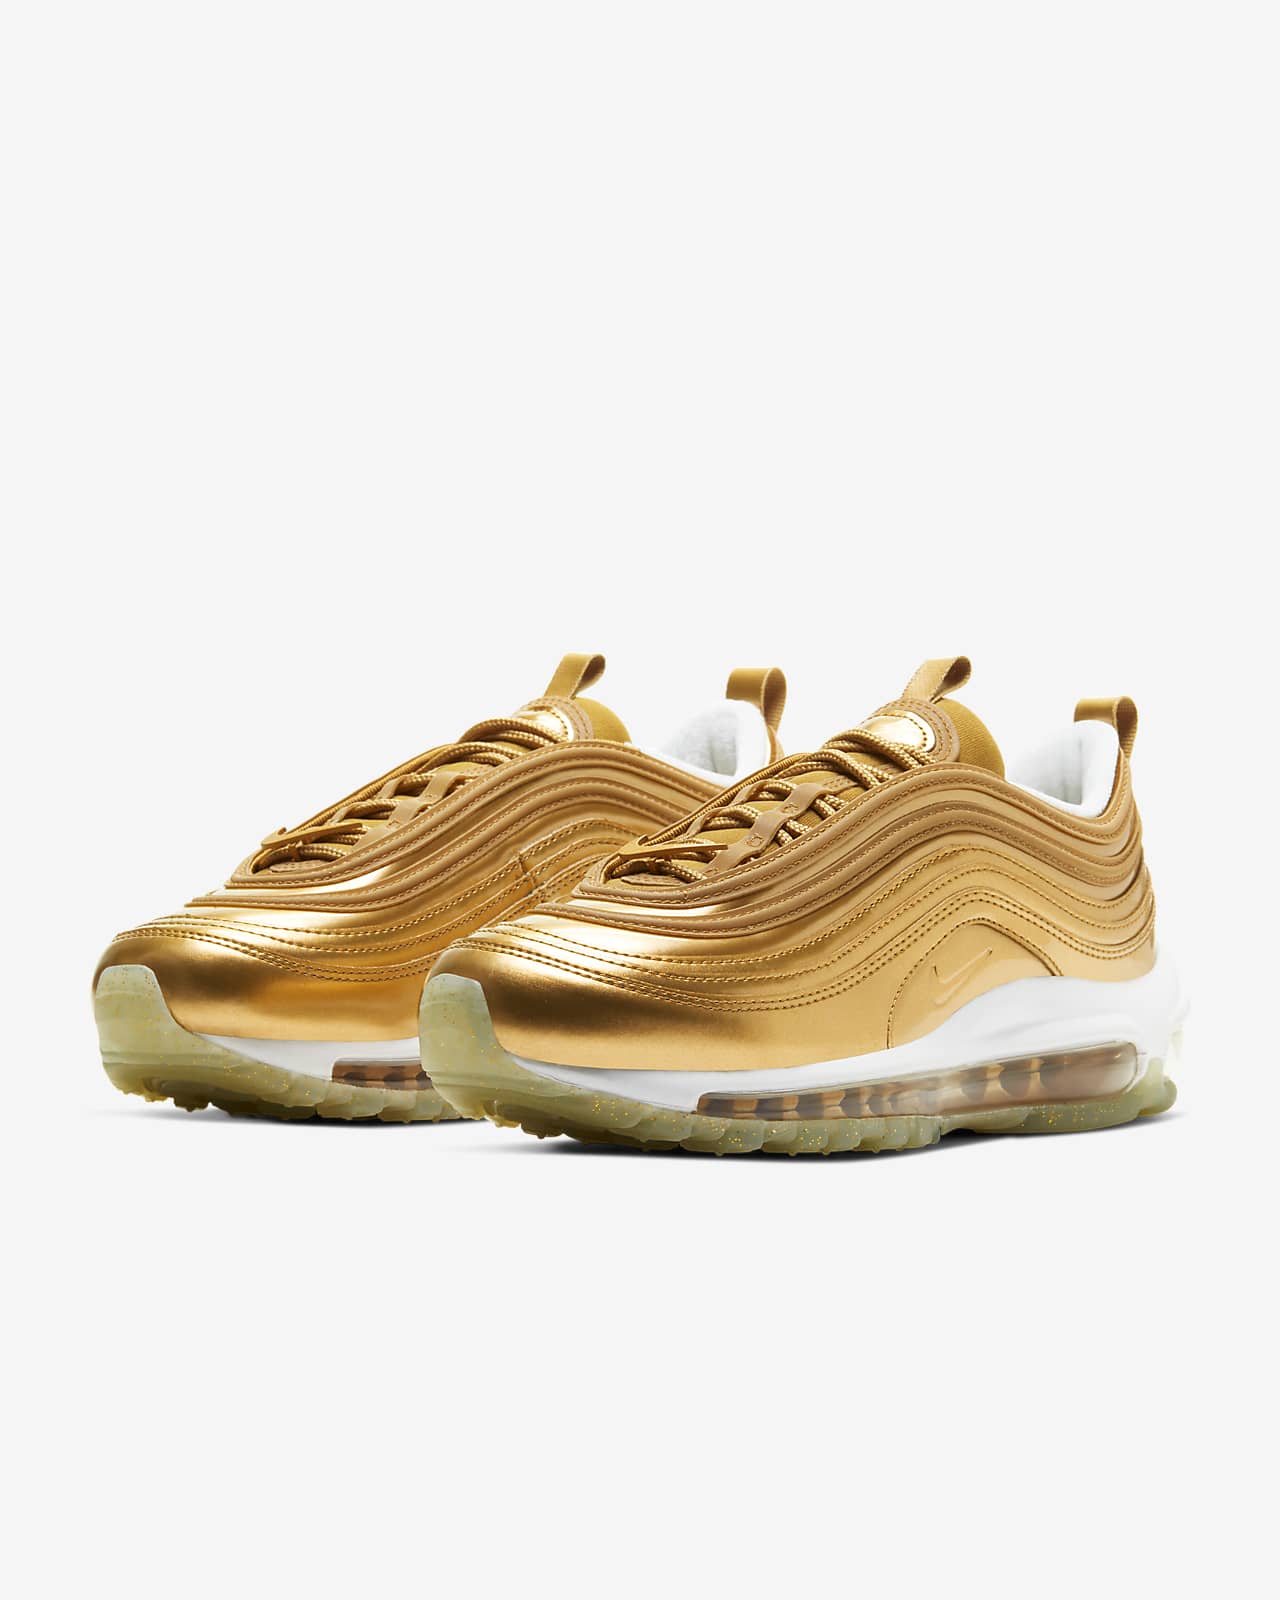 nike air max 97 lx overbranded women's shoe